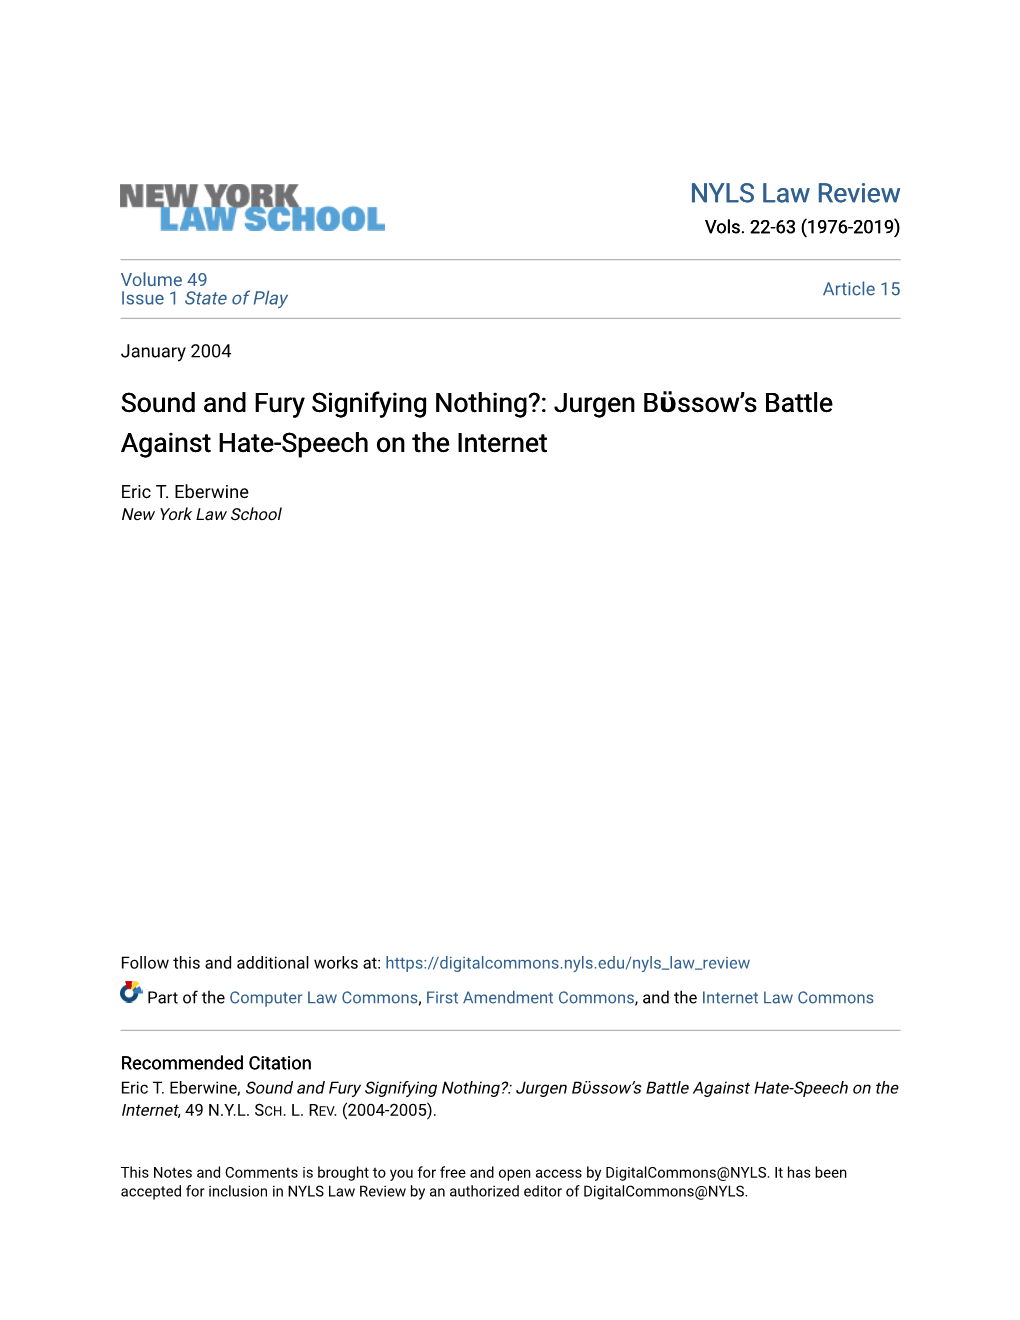 Sound and Fury Signifying Nothing?: Jurgen Bϋssow's Battle Against Hate-Speech on the Internet